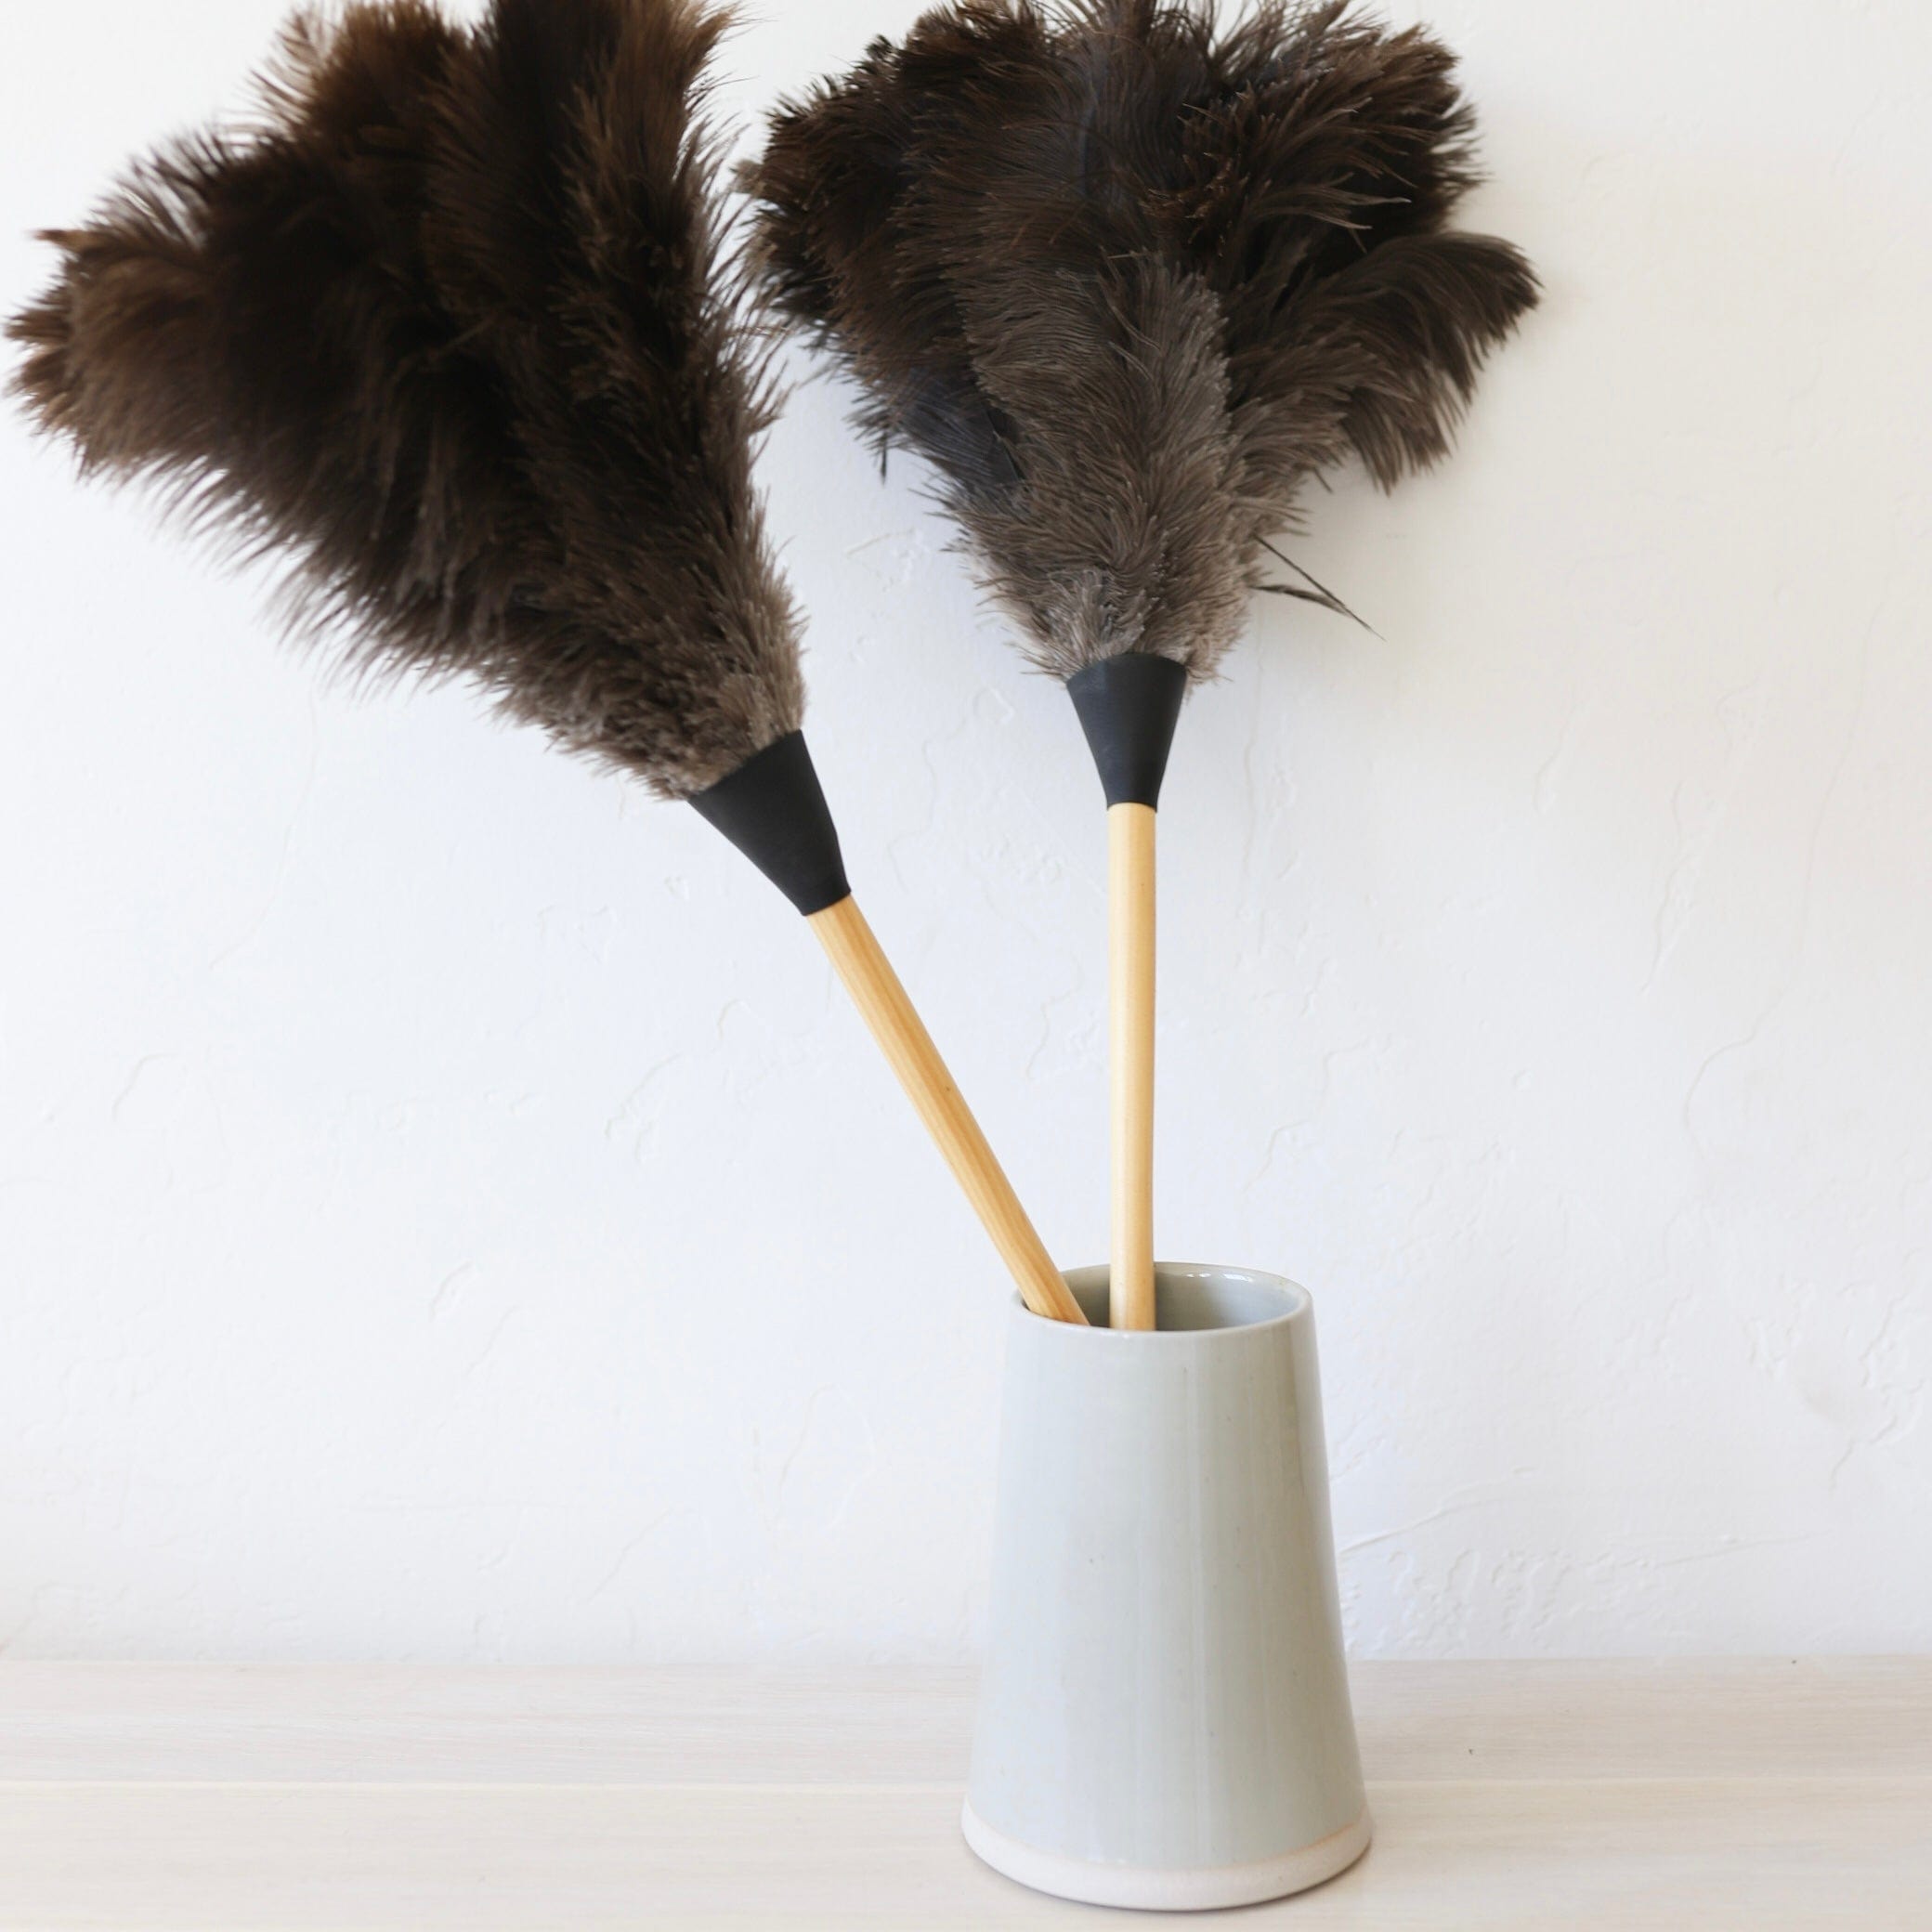 Earth & Nest Clean Home Black Feather Duster